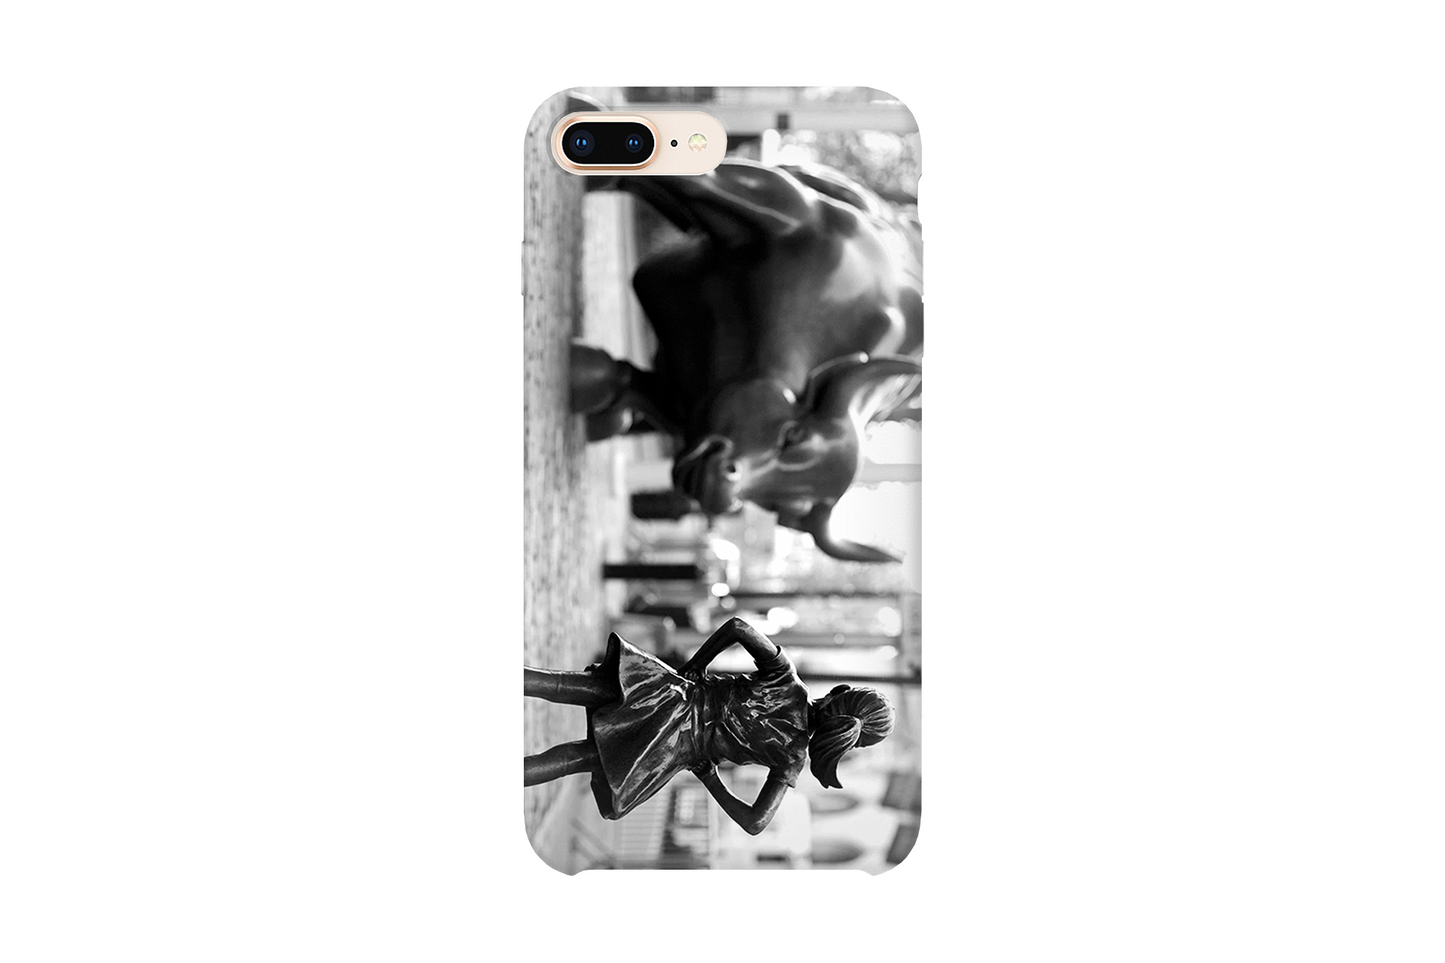 Fearless Girl Wall Street Bull iPhone case by Mike Lindwasser